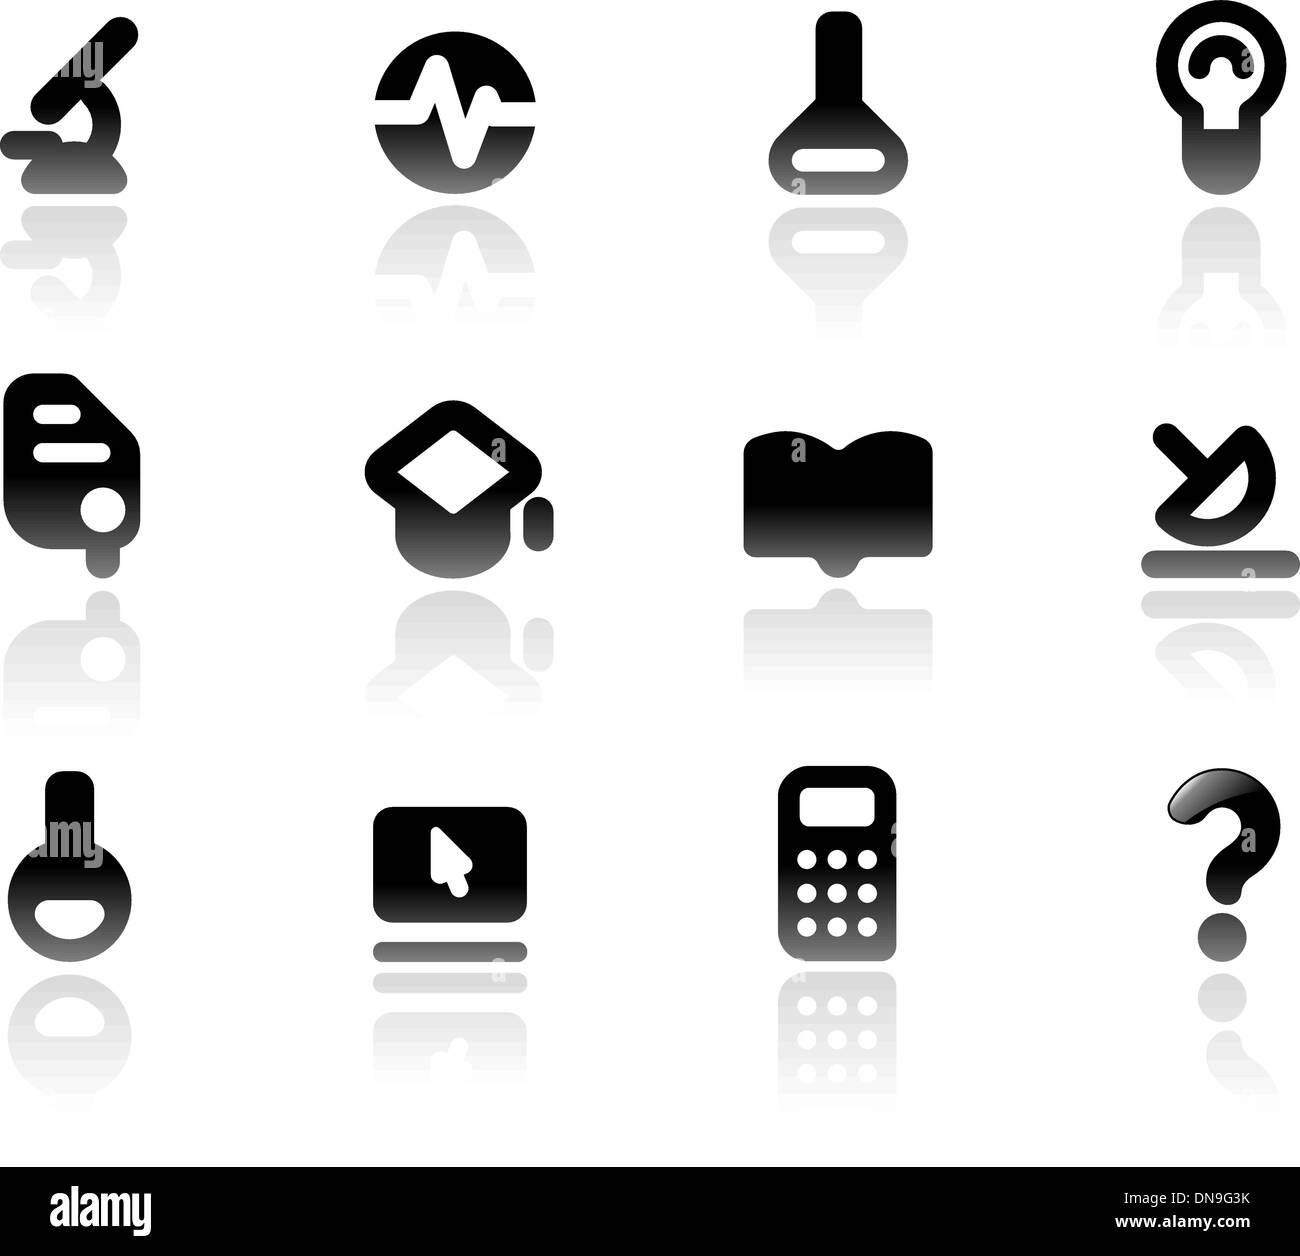 Perfect icons for education Stock Vector